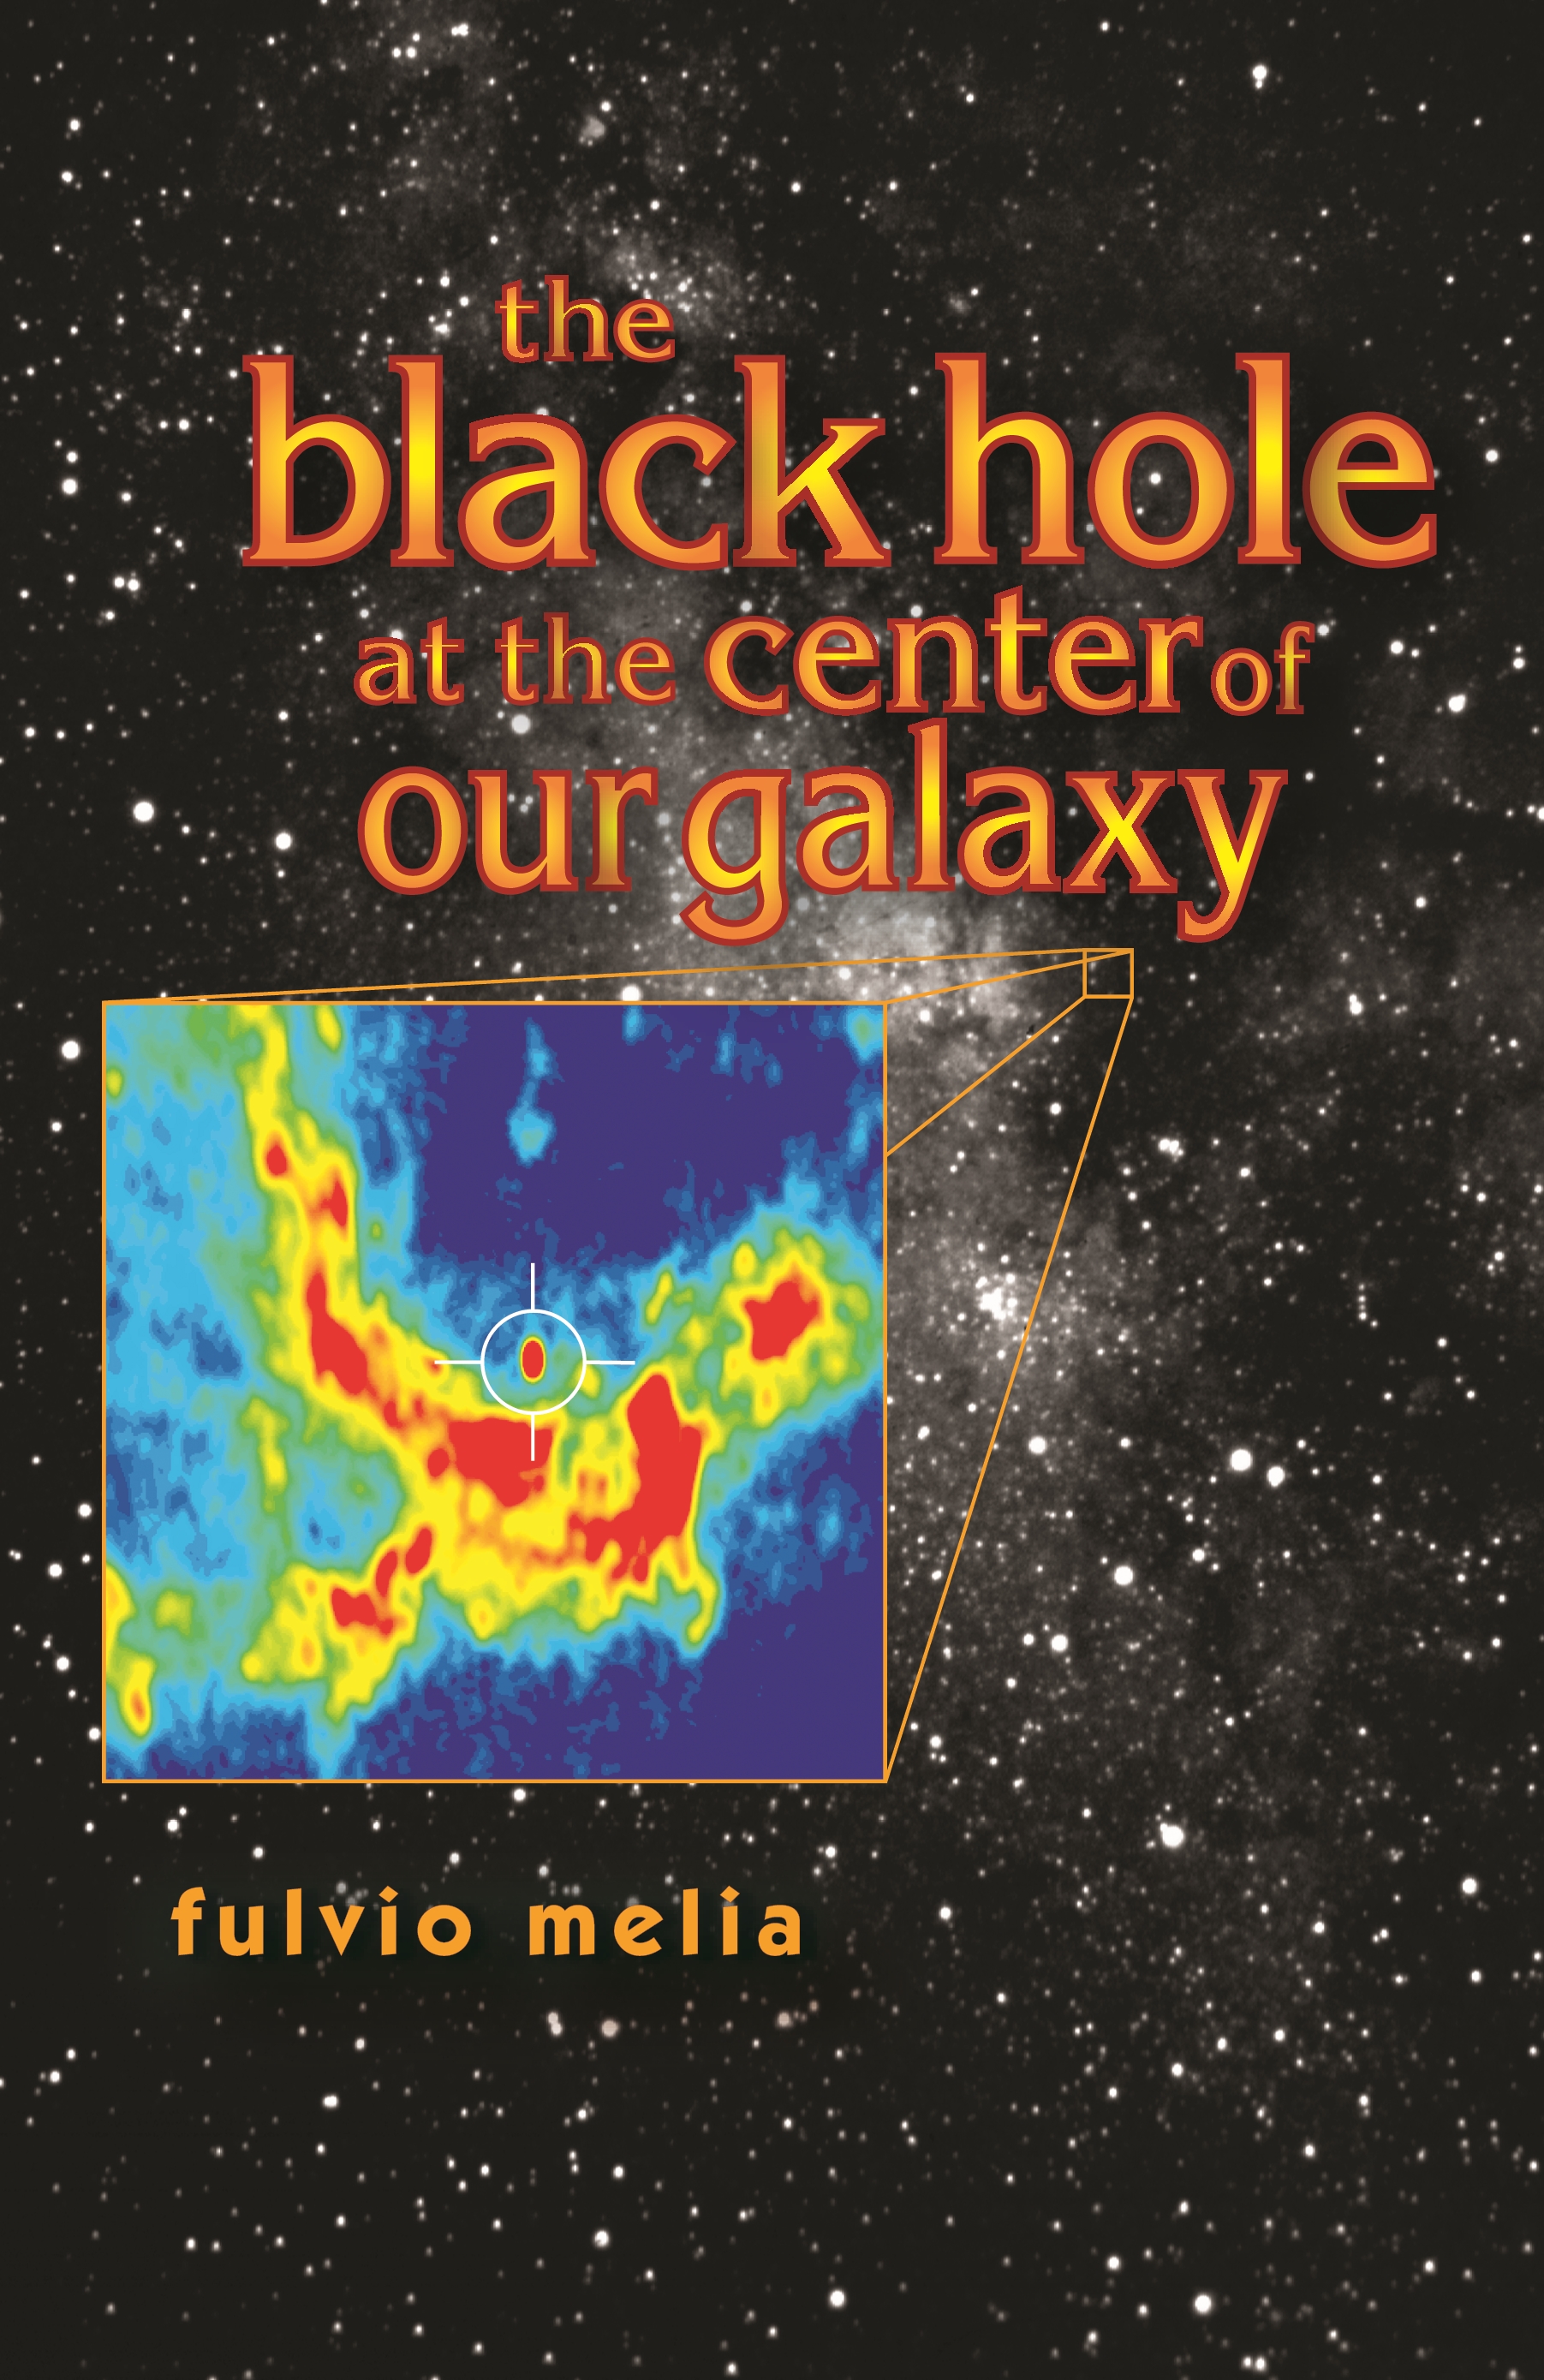 black hole at center of universe